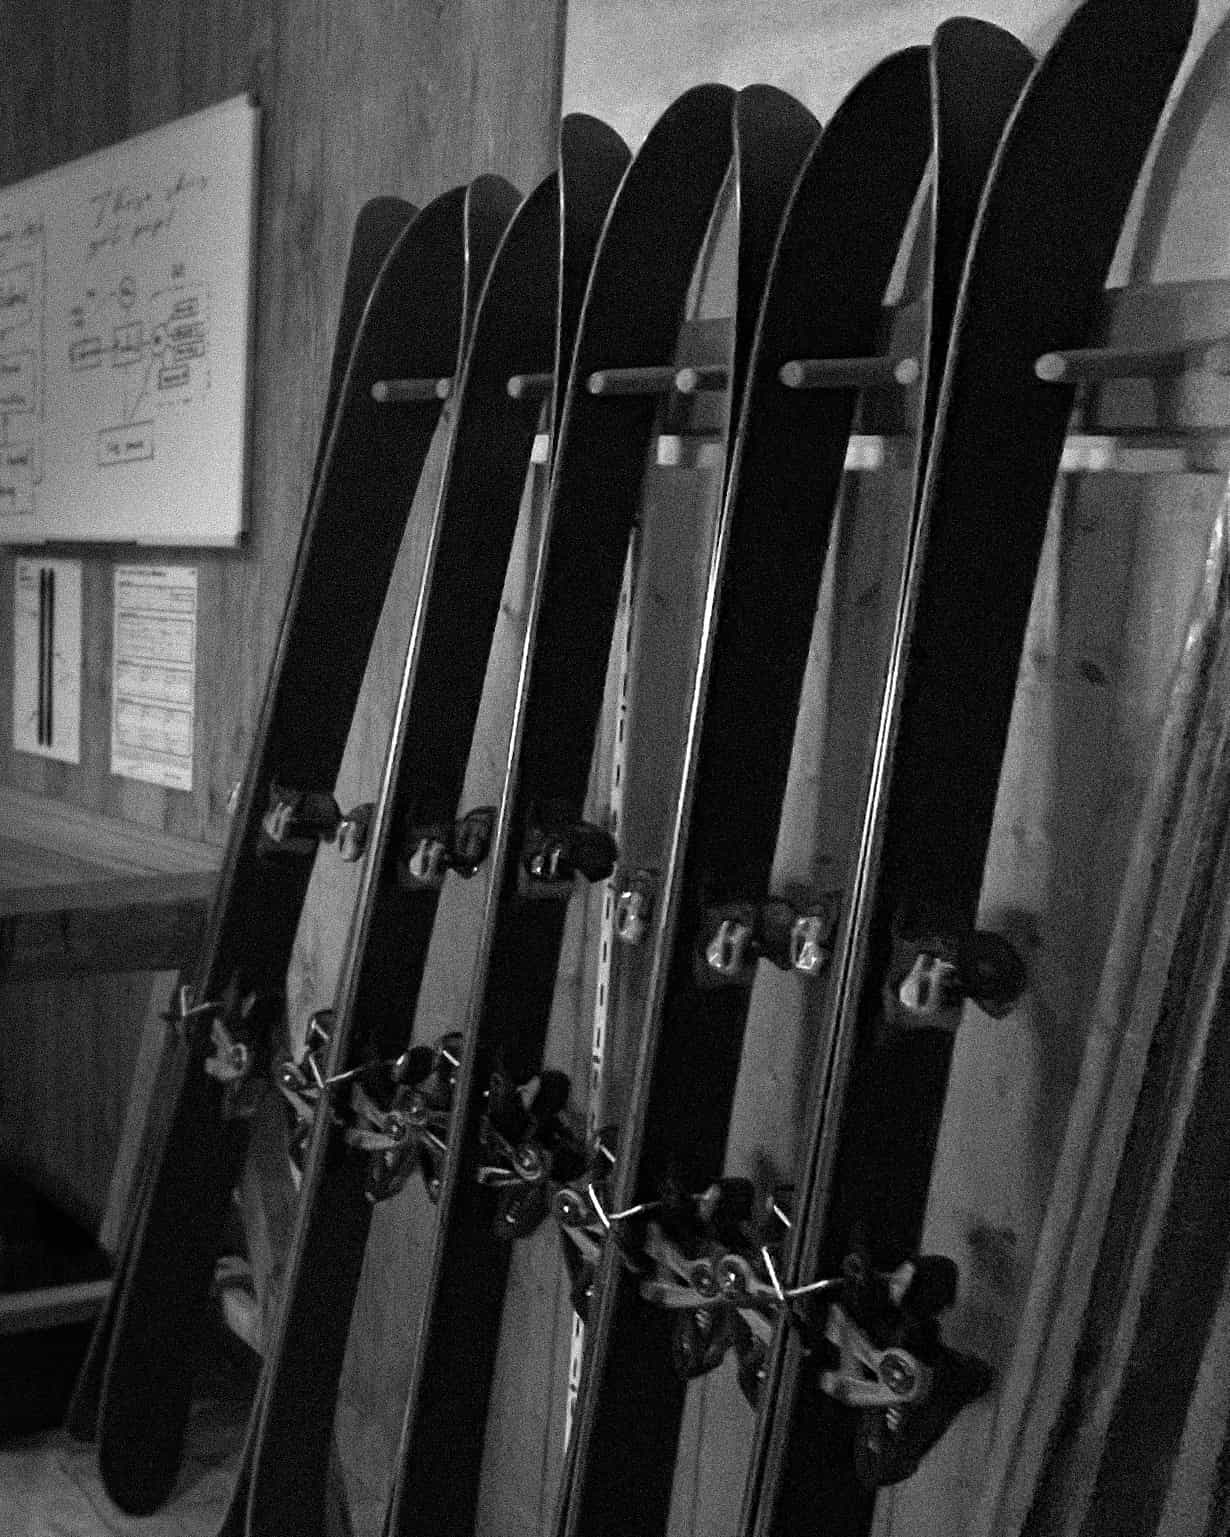 Candide skis sell out in 24 hrs